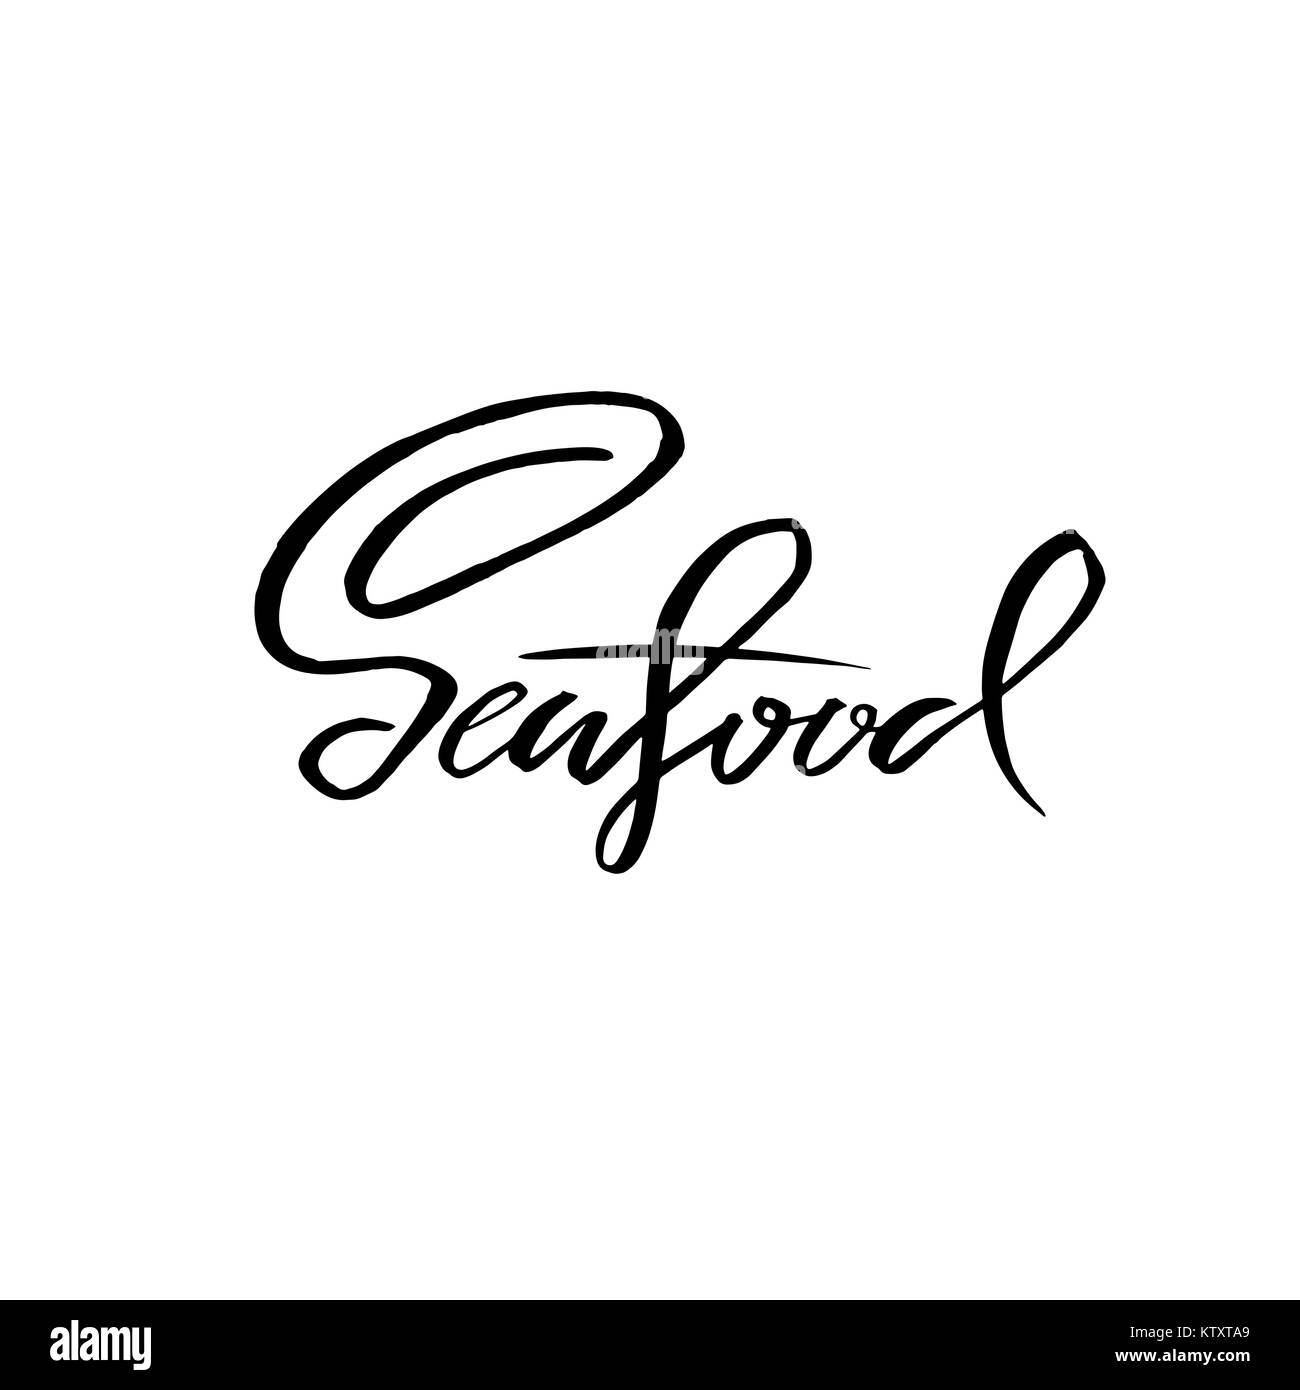 Seafood. Handdrawn brush pen inc lettering. Could be used for seafood market. Vector illustration. Stock Vector